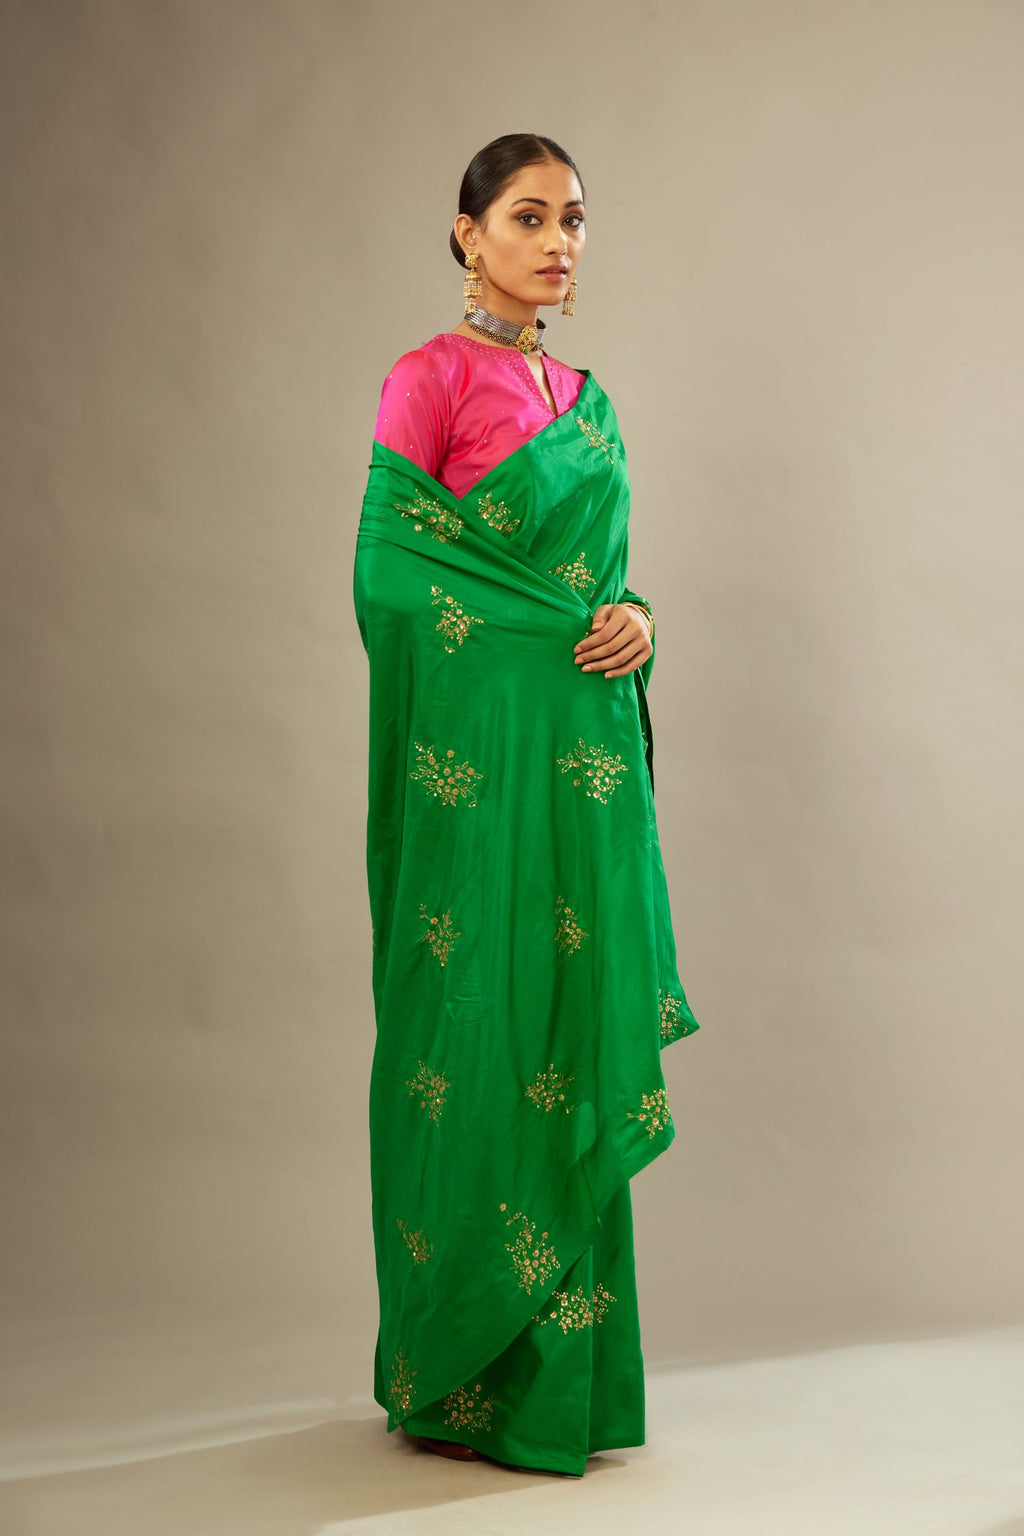 Grass green silk saree set with hand embroidered delicate sequins floral butas all over.